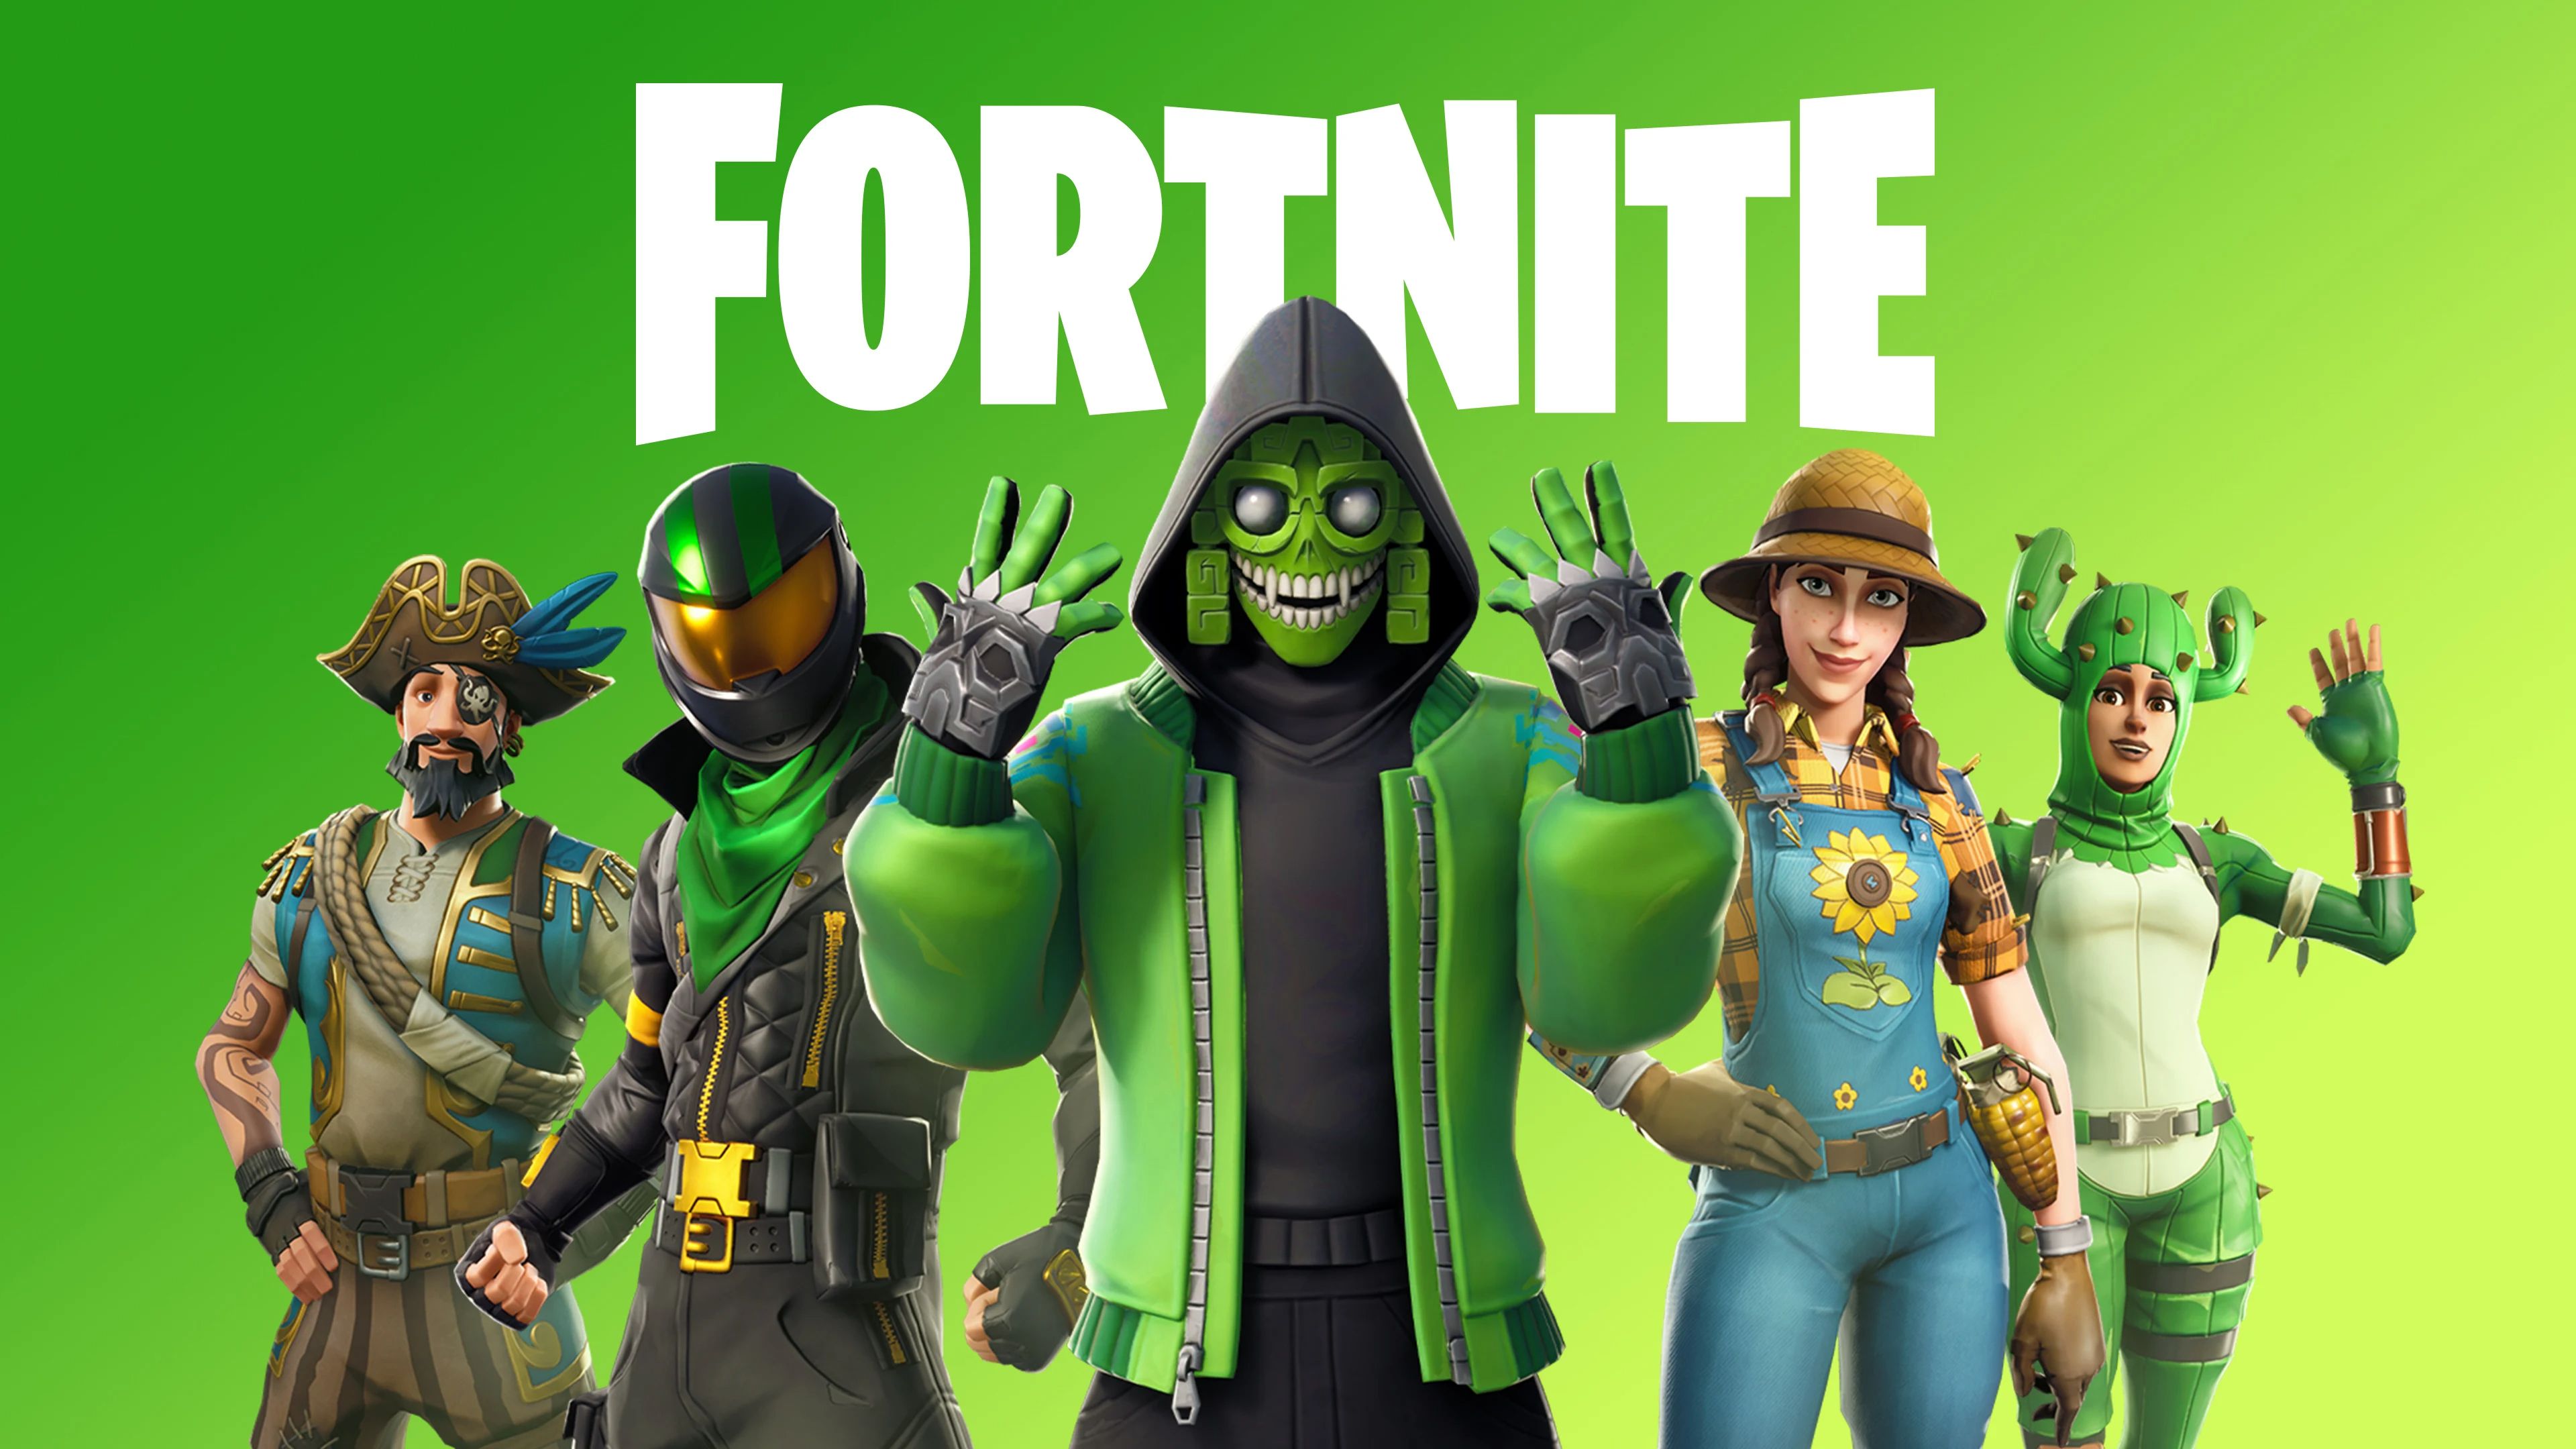 A screen with five Fortnite characters and the Fortnite logo with a green theme and background